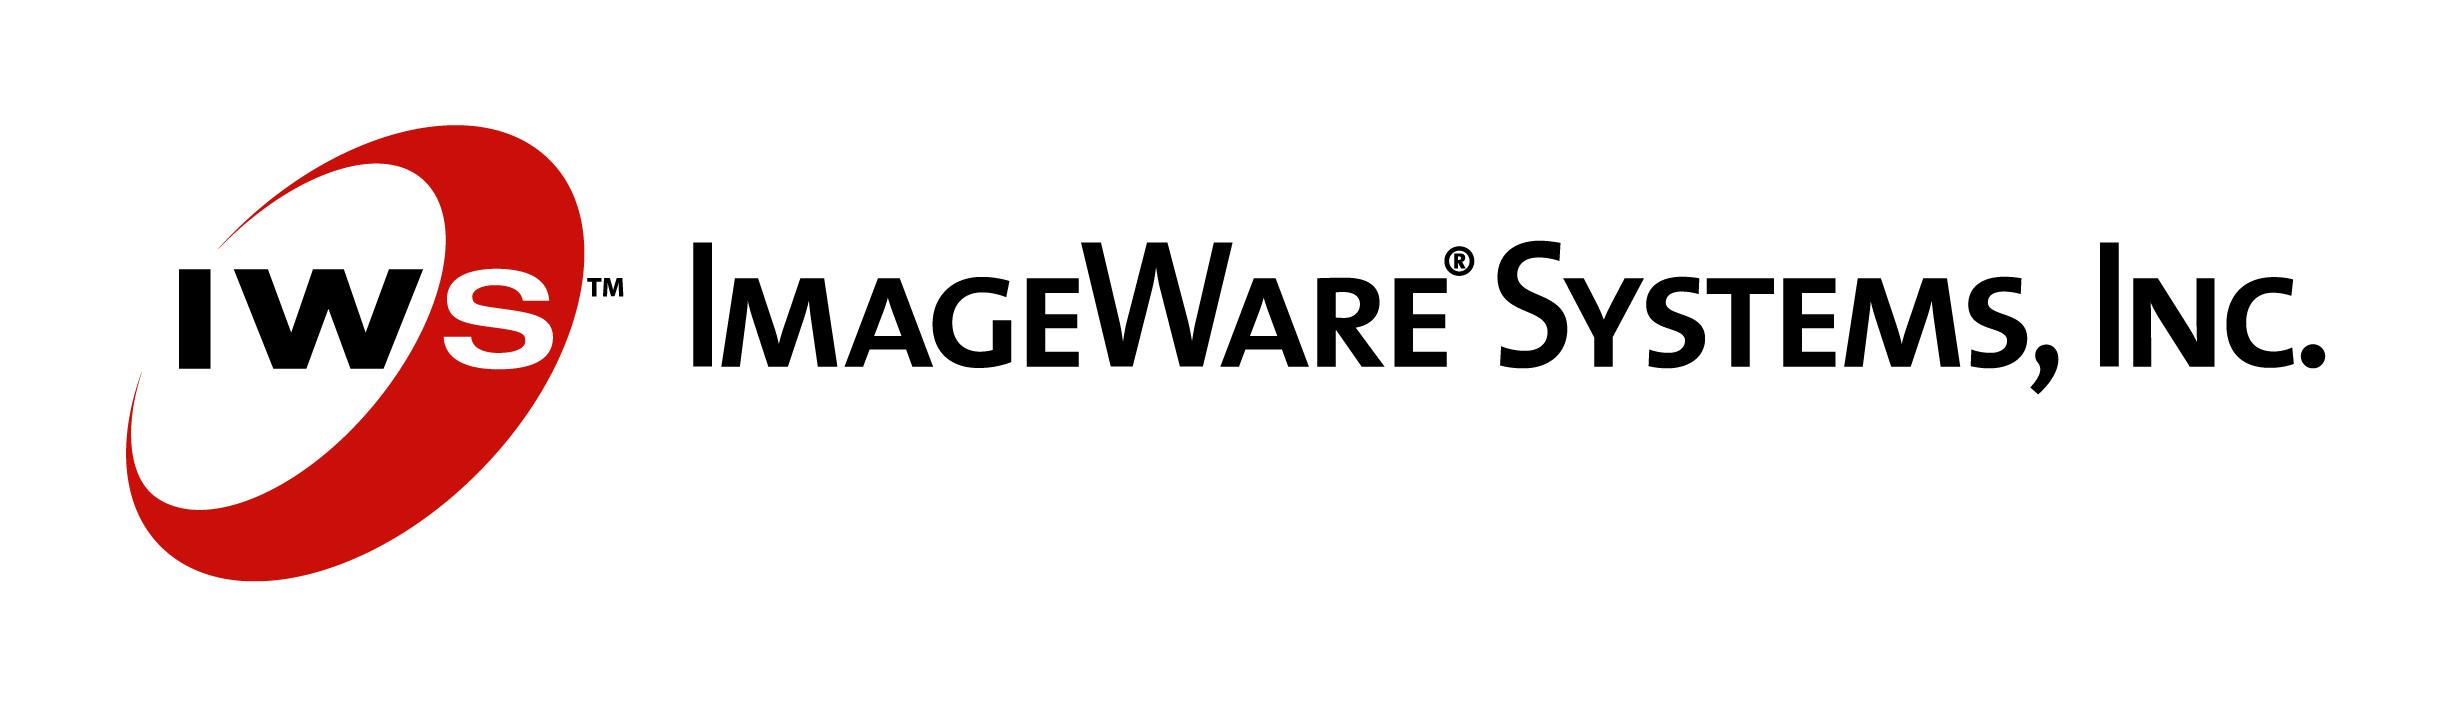 T-Systems Logo - Cloud Biometrics: ImageWare Systems Enters Testing Phase With T ...